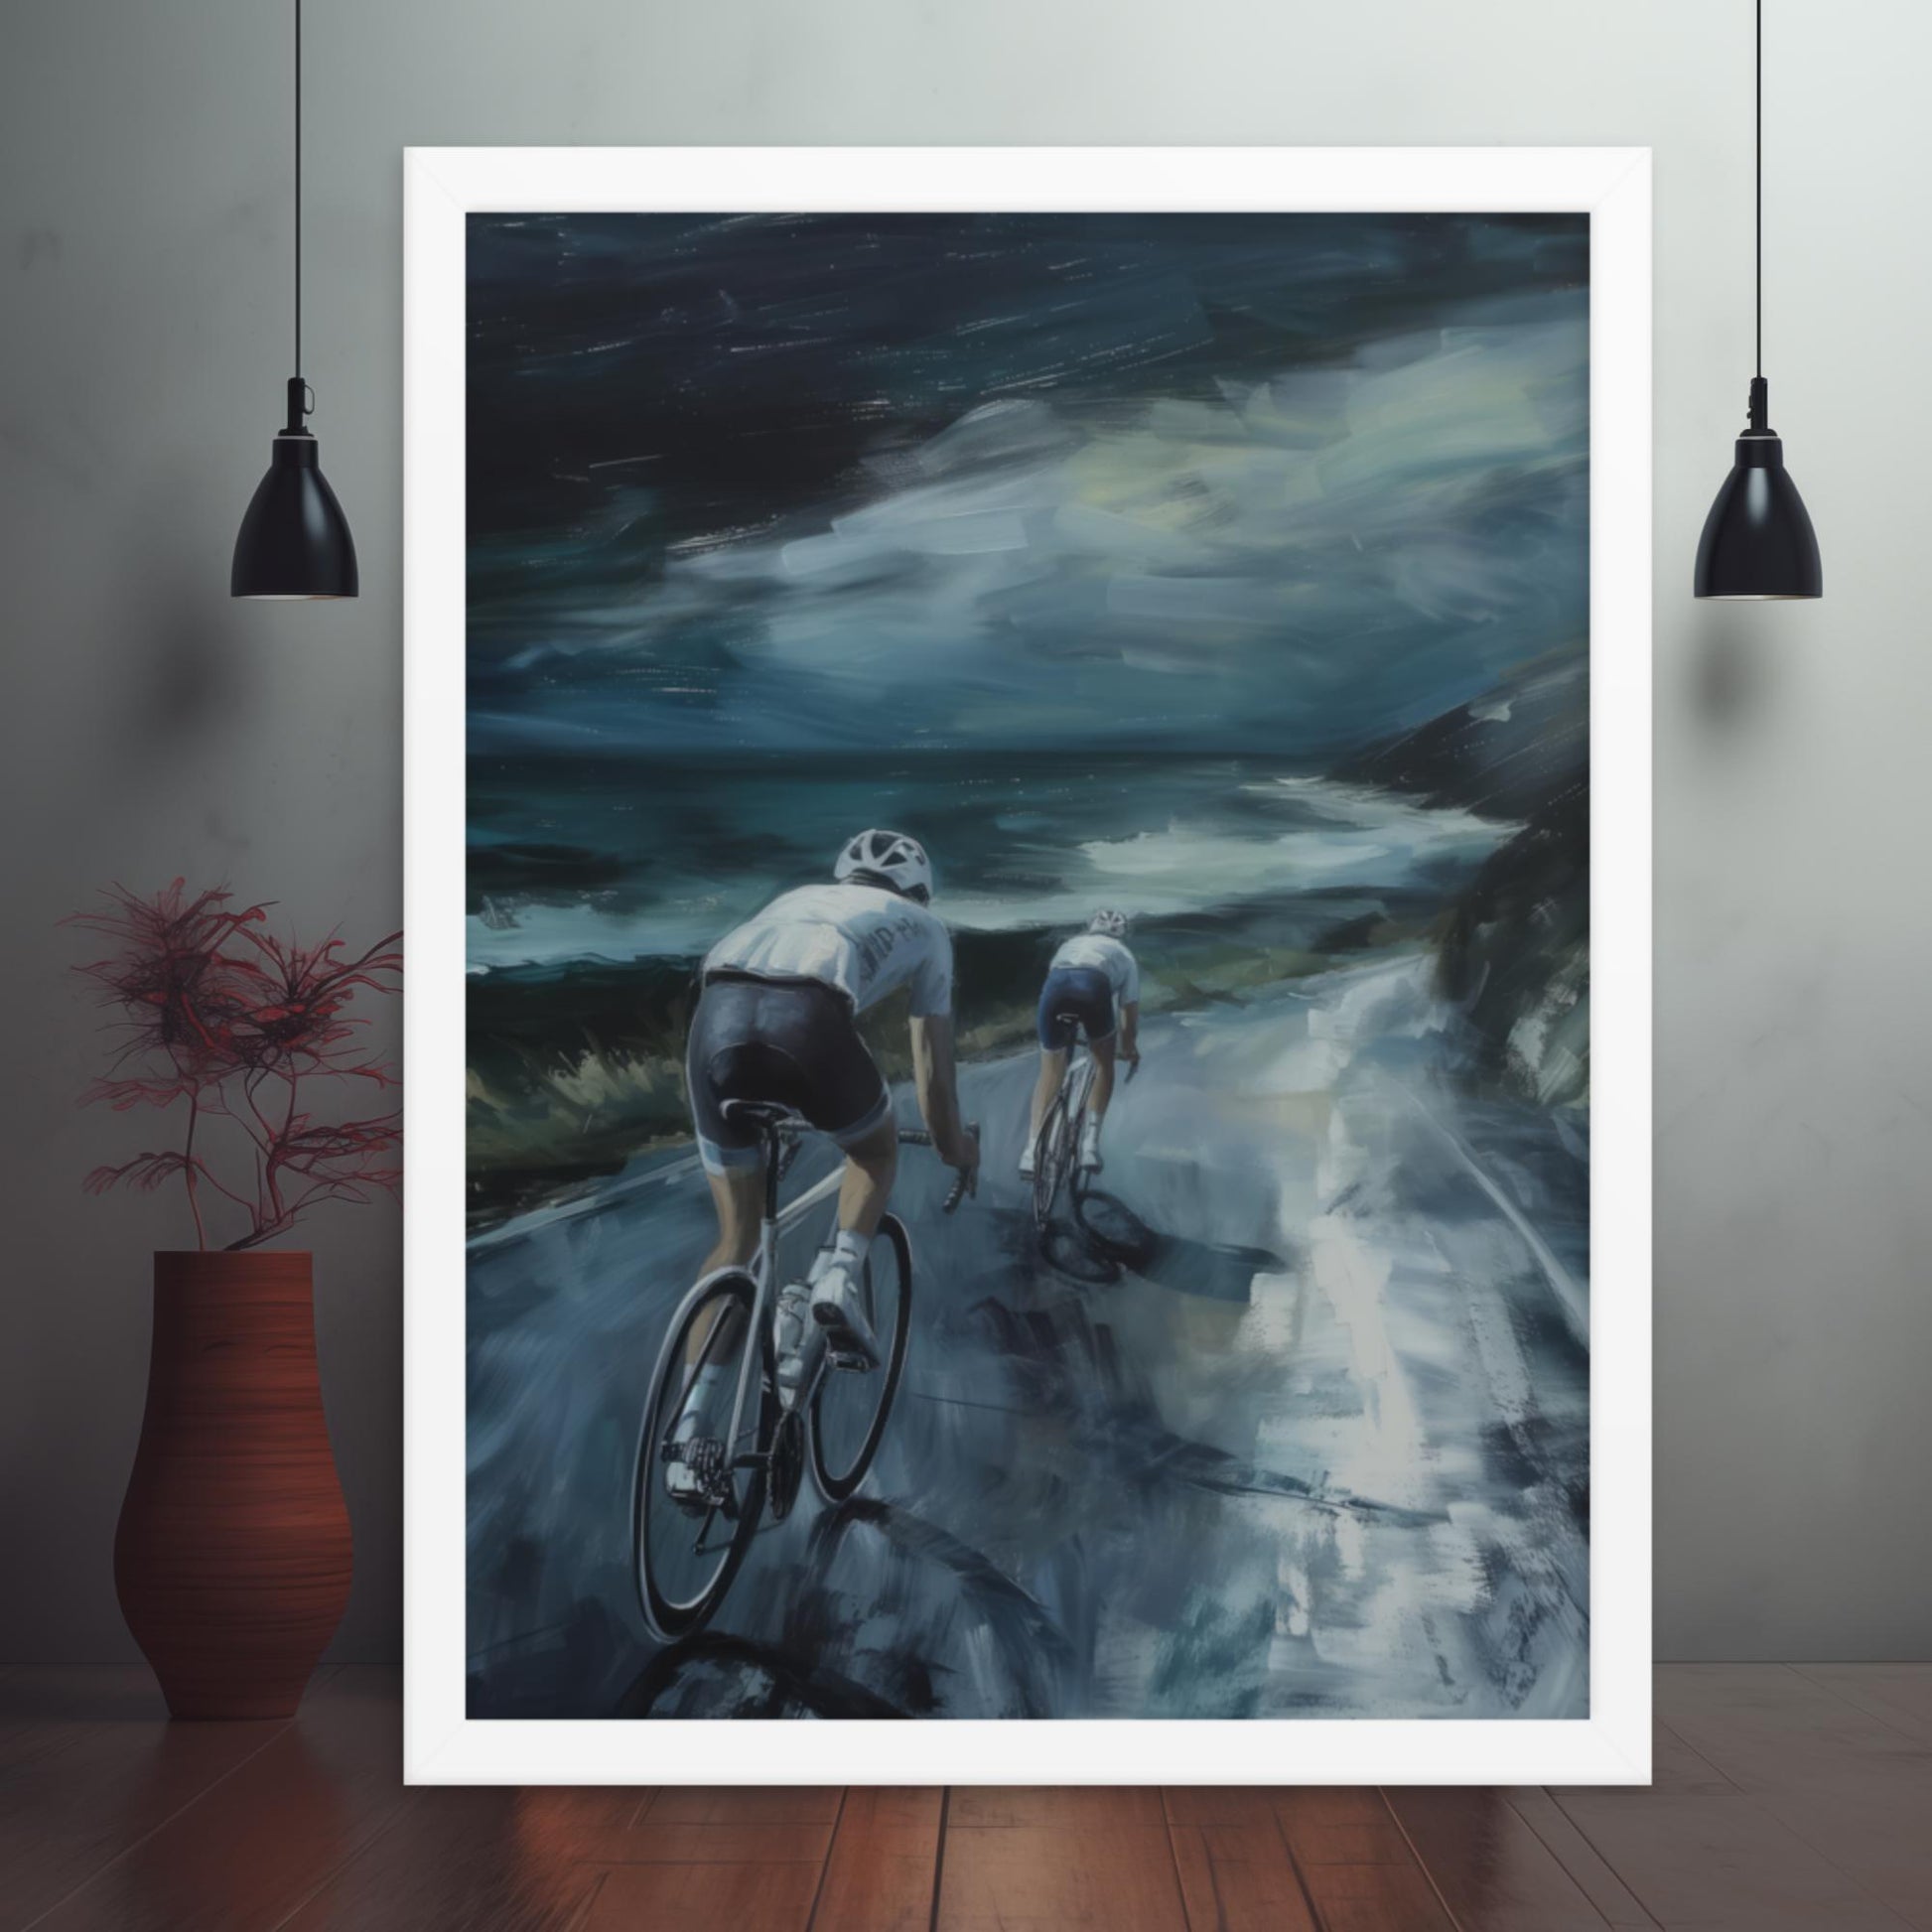 Ocean Gale: The Cyclists' Battle Framed poster